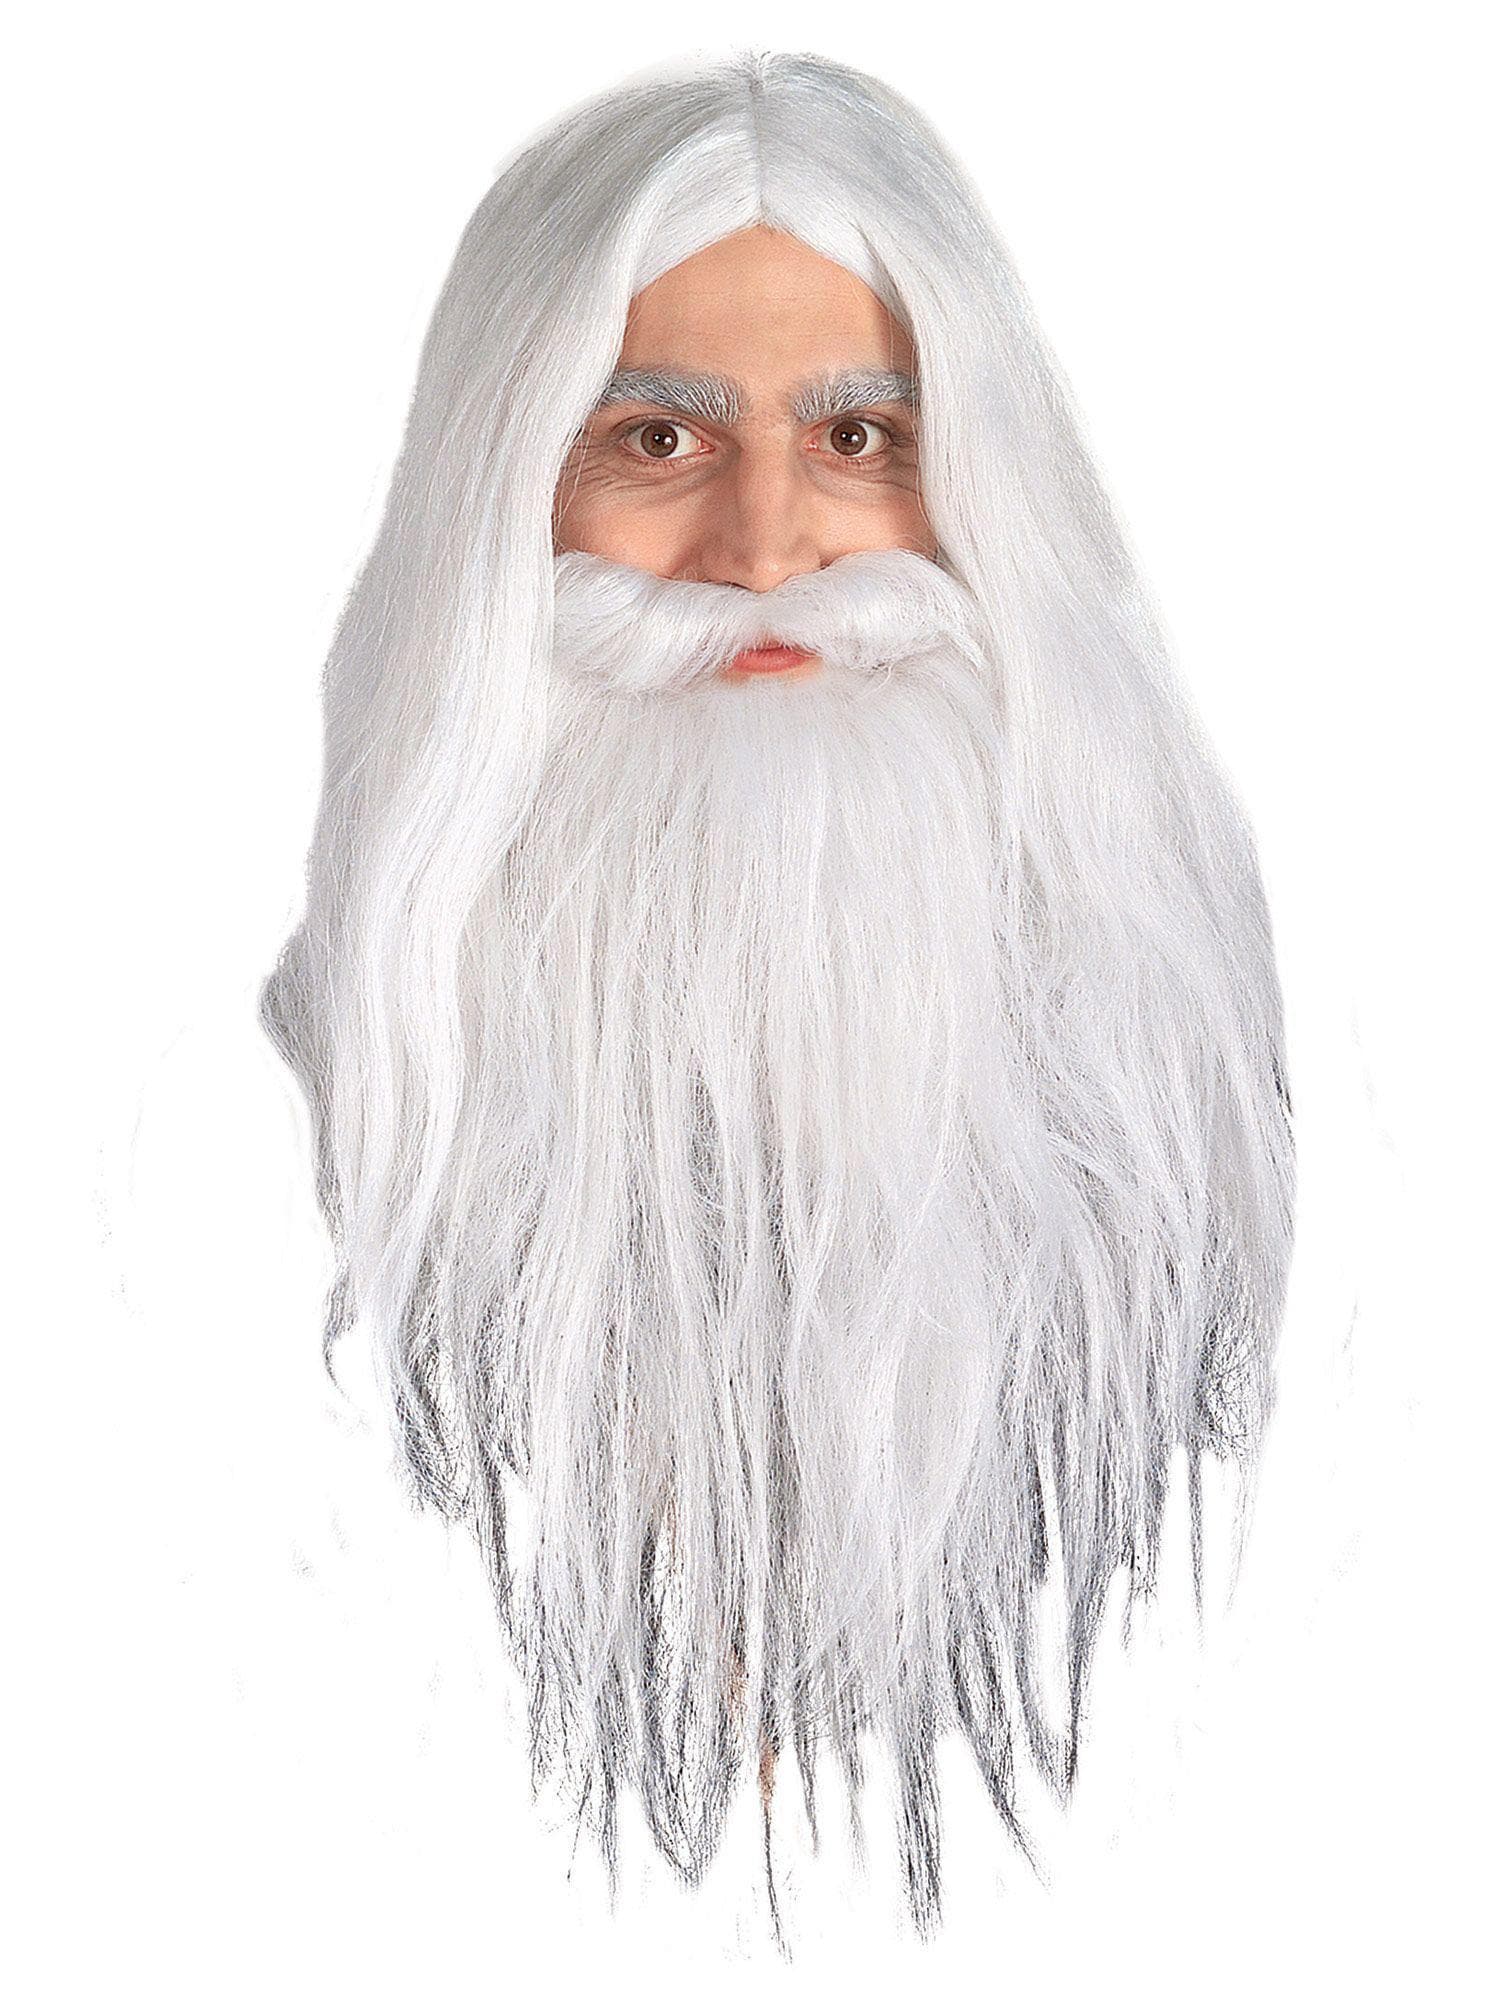 Kids' The Lord of the Rings Gandalf Wig and Beard - costumes.com